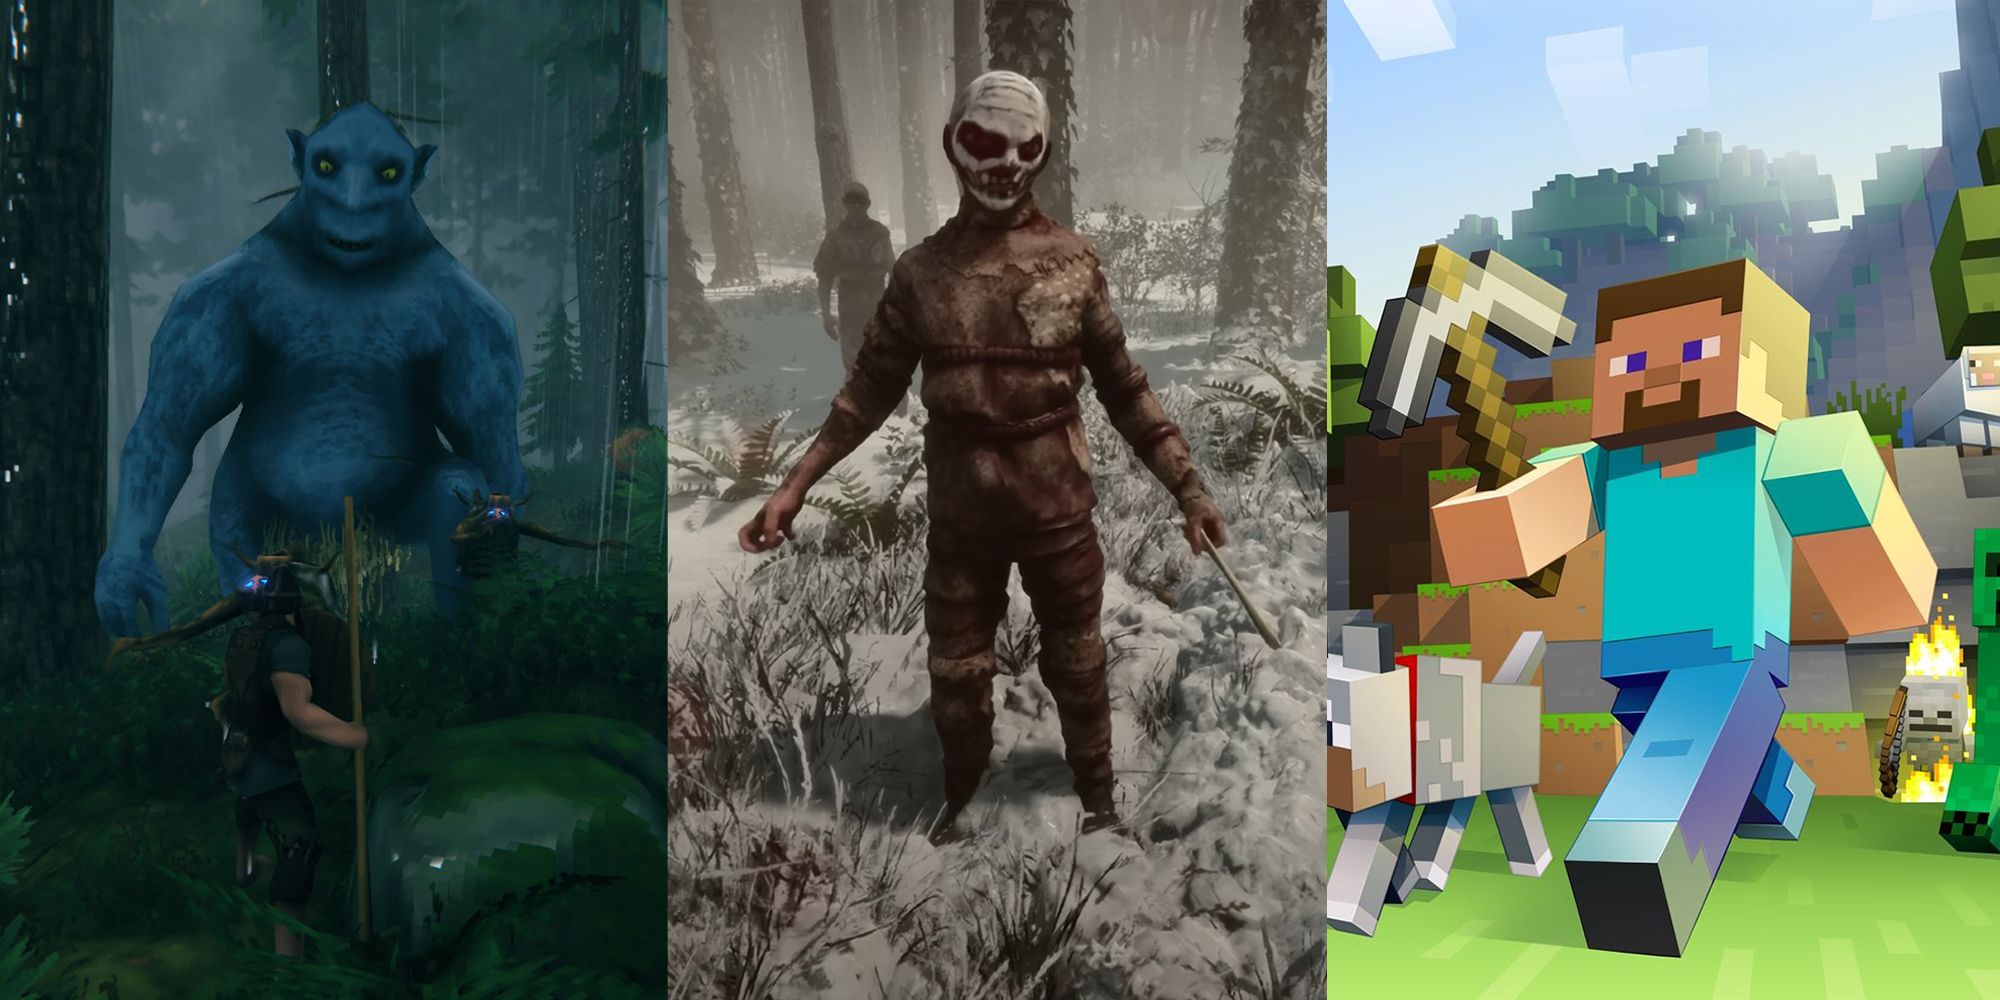 Character brandishes spear at tall creature, an enemy stands in the forest, and Minecraft character walks holding pickax